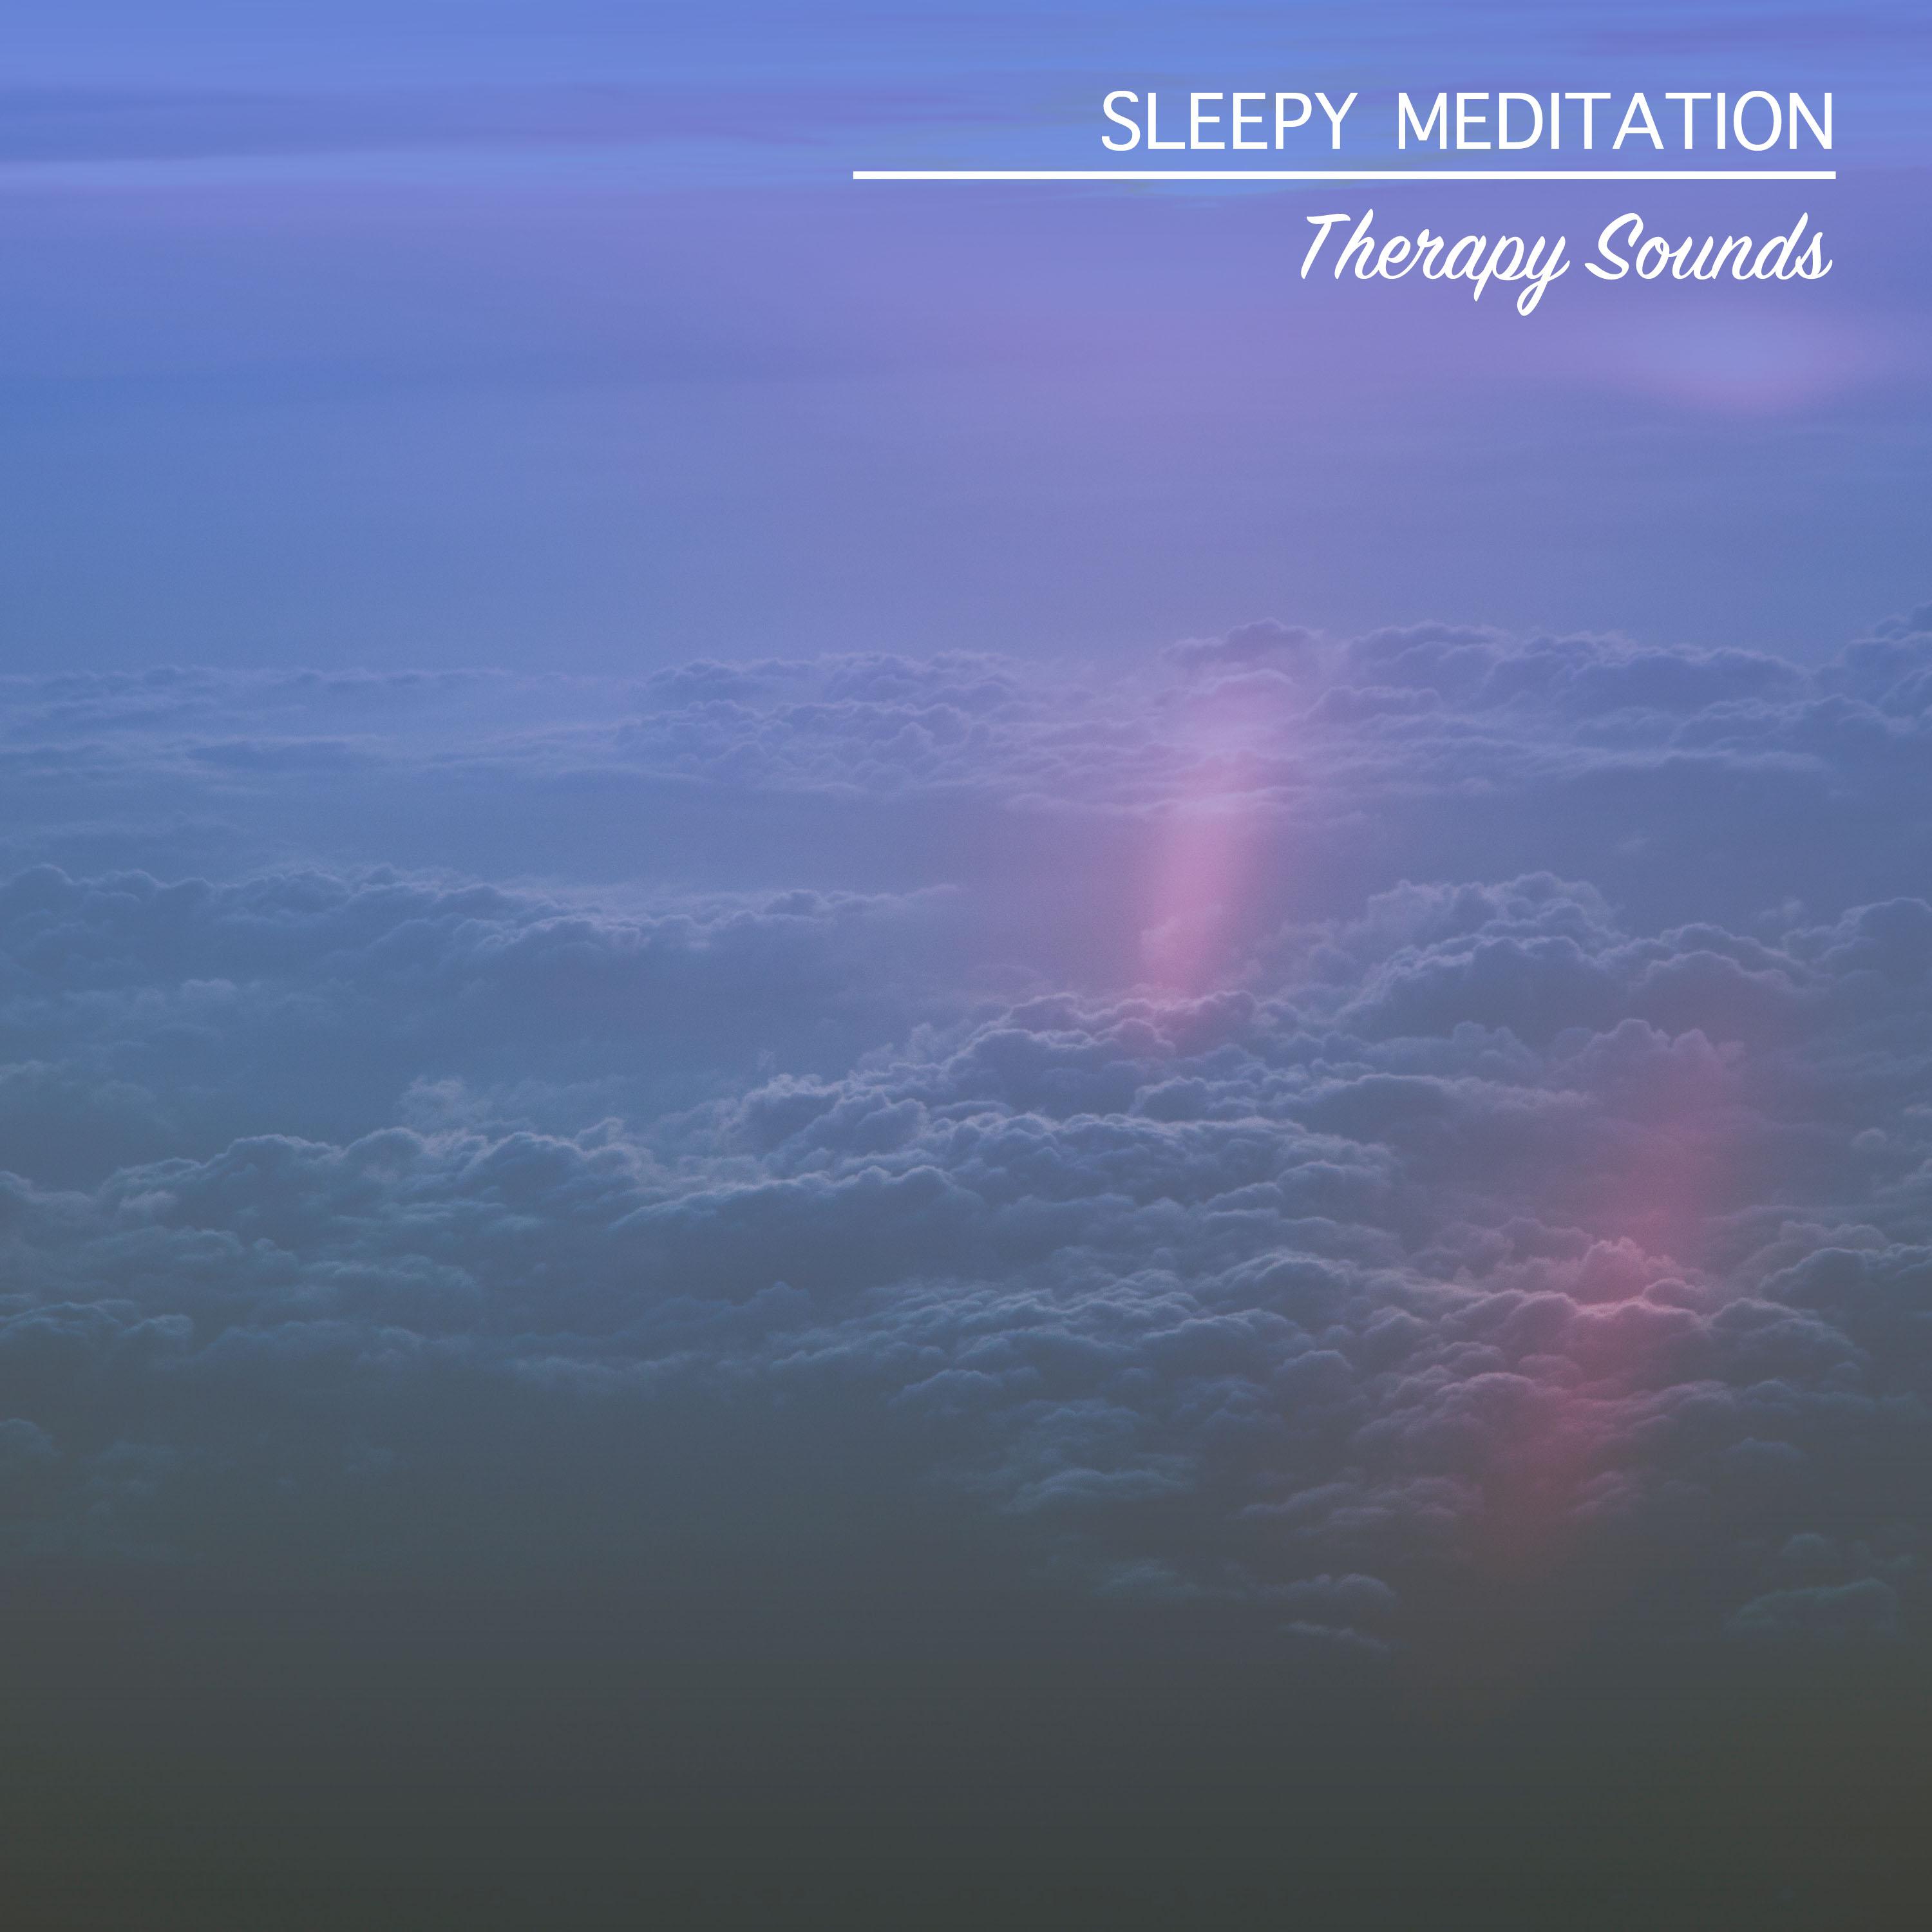 17 Sleepy Meditaiton and Therapy Sounds